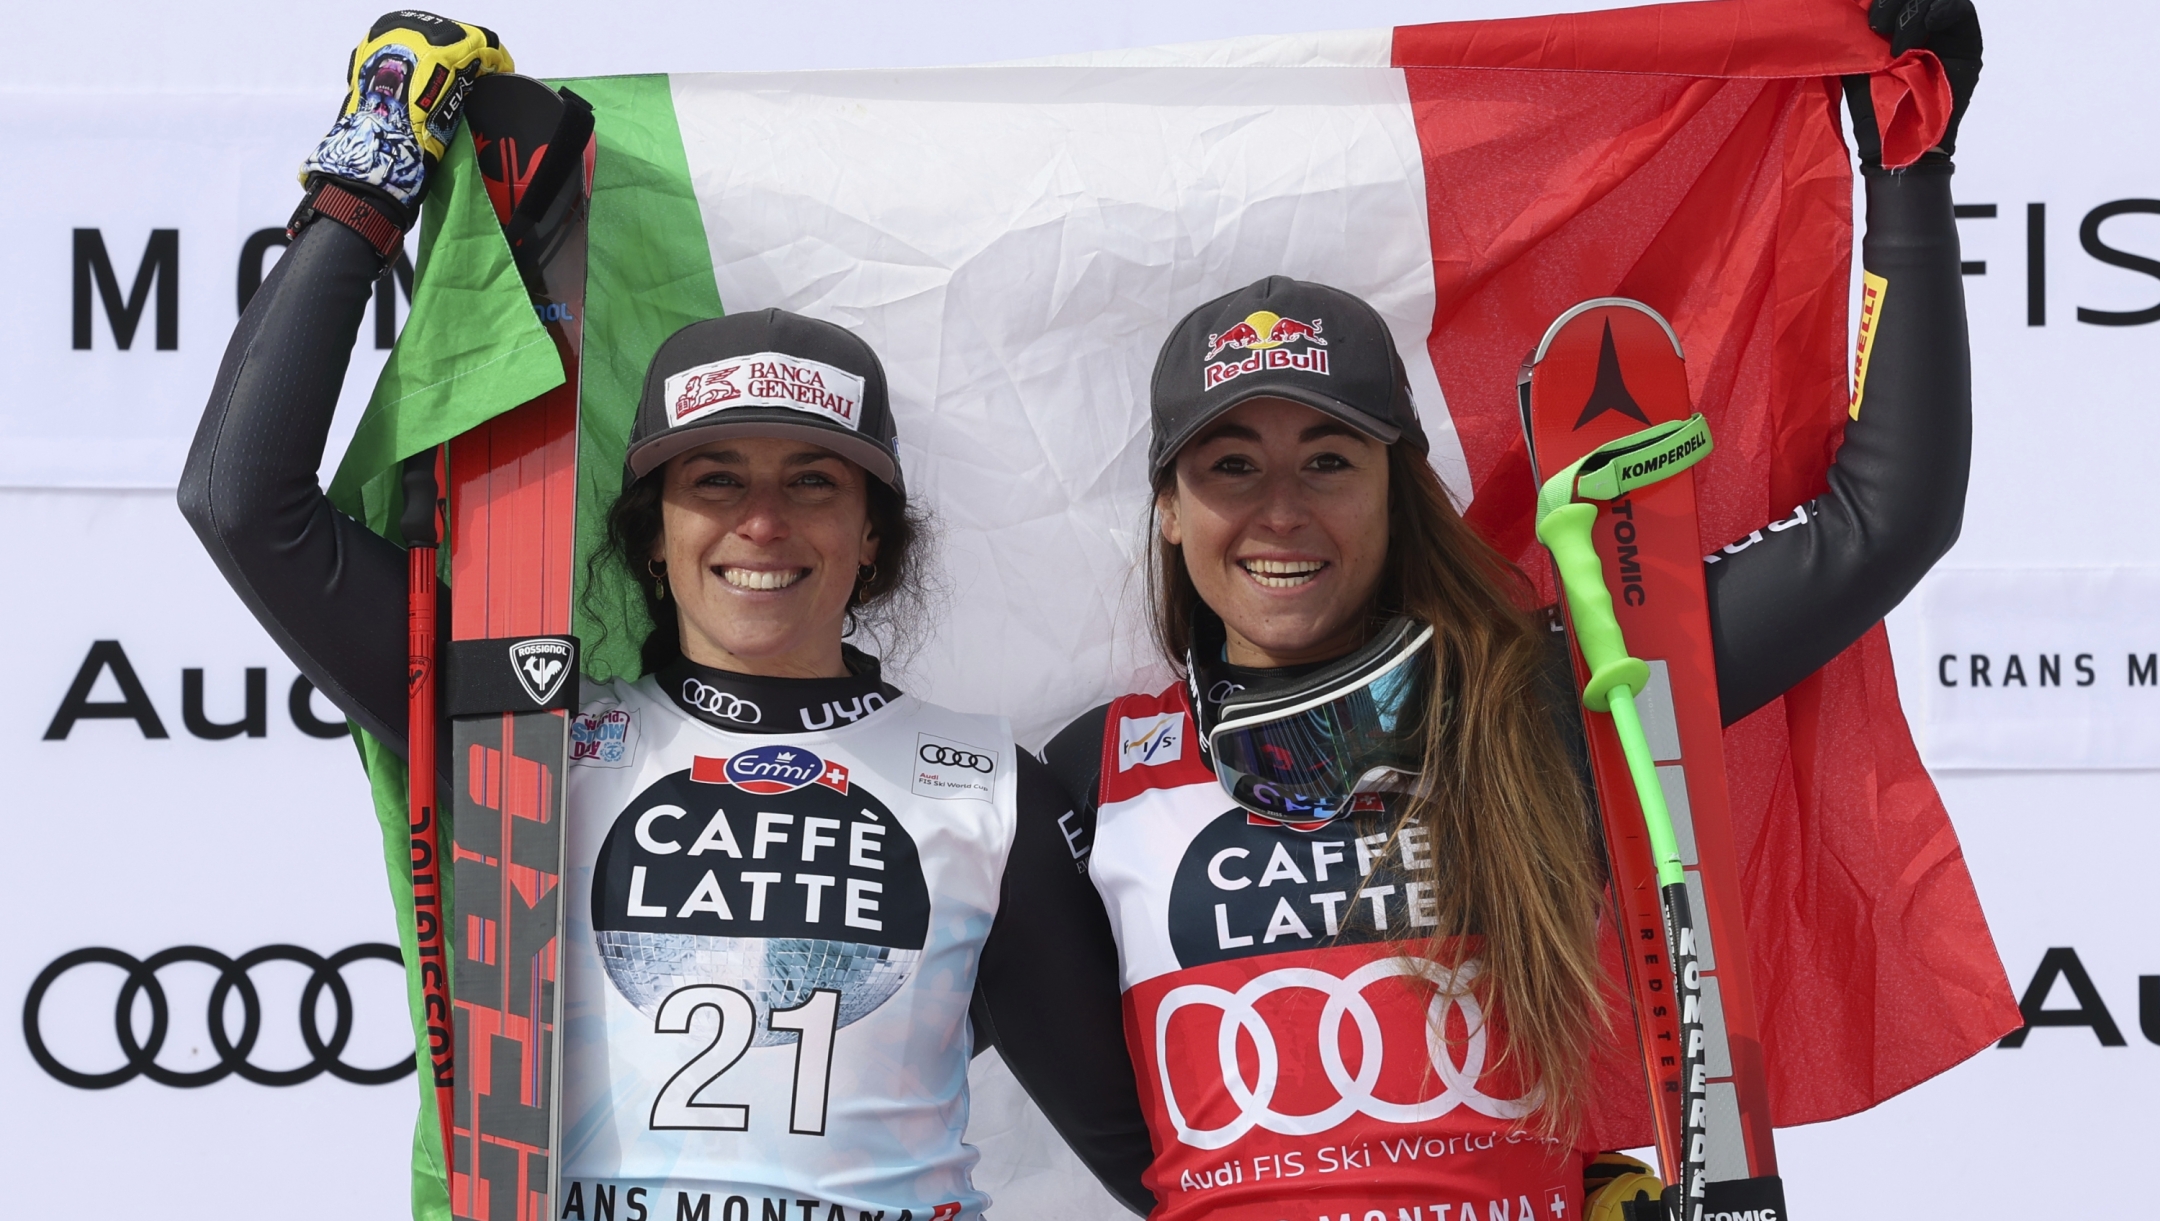 From left, second placed Italy's Federica Brignone and the winner Italy's Sofia Goggia celebrate after completing an alpine ski, women's World Cup downhill race in Crans Montana, Switzerland, Sunday, Feb. 26, 2023. (AP Photo/Alessandro Trovati)